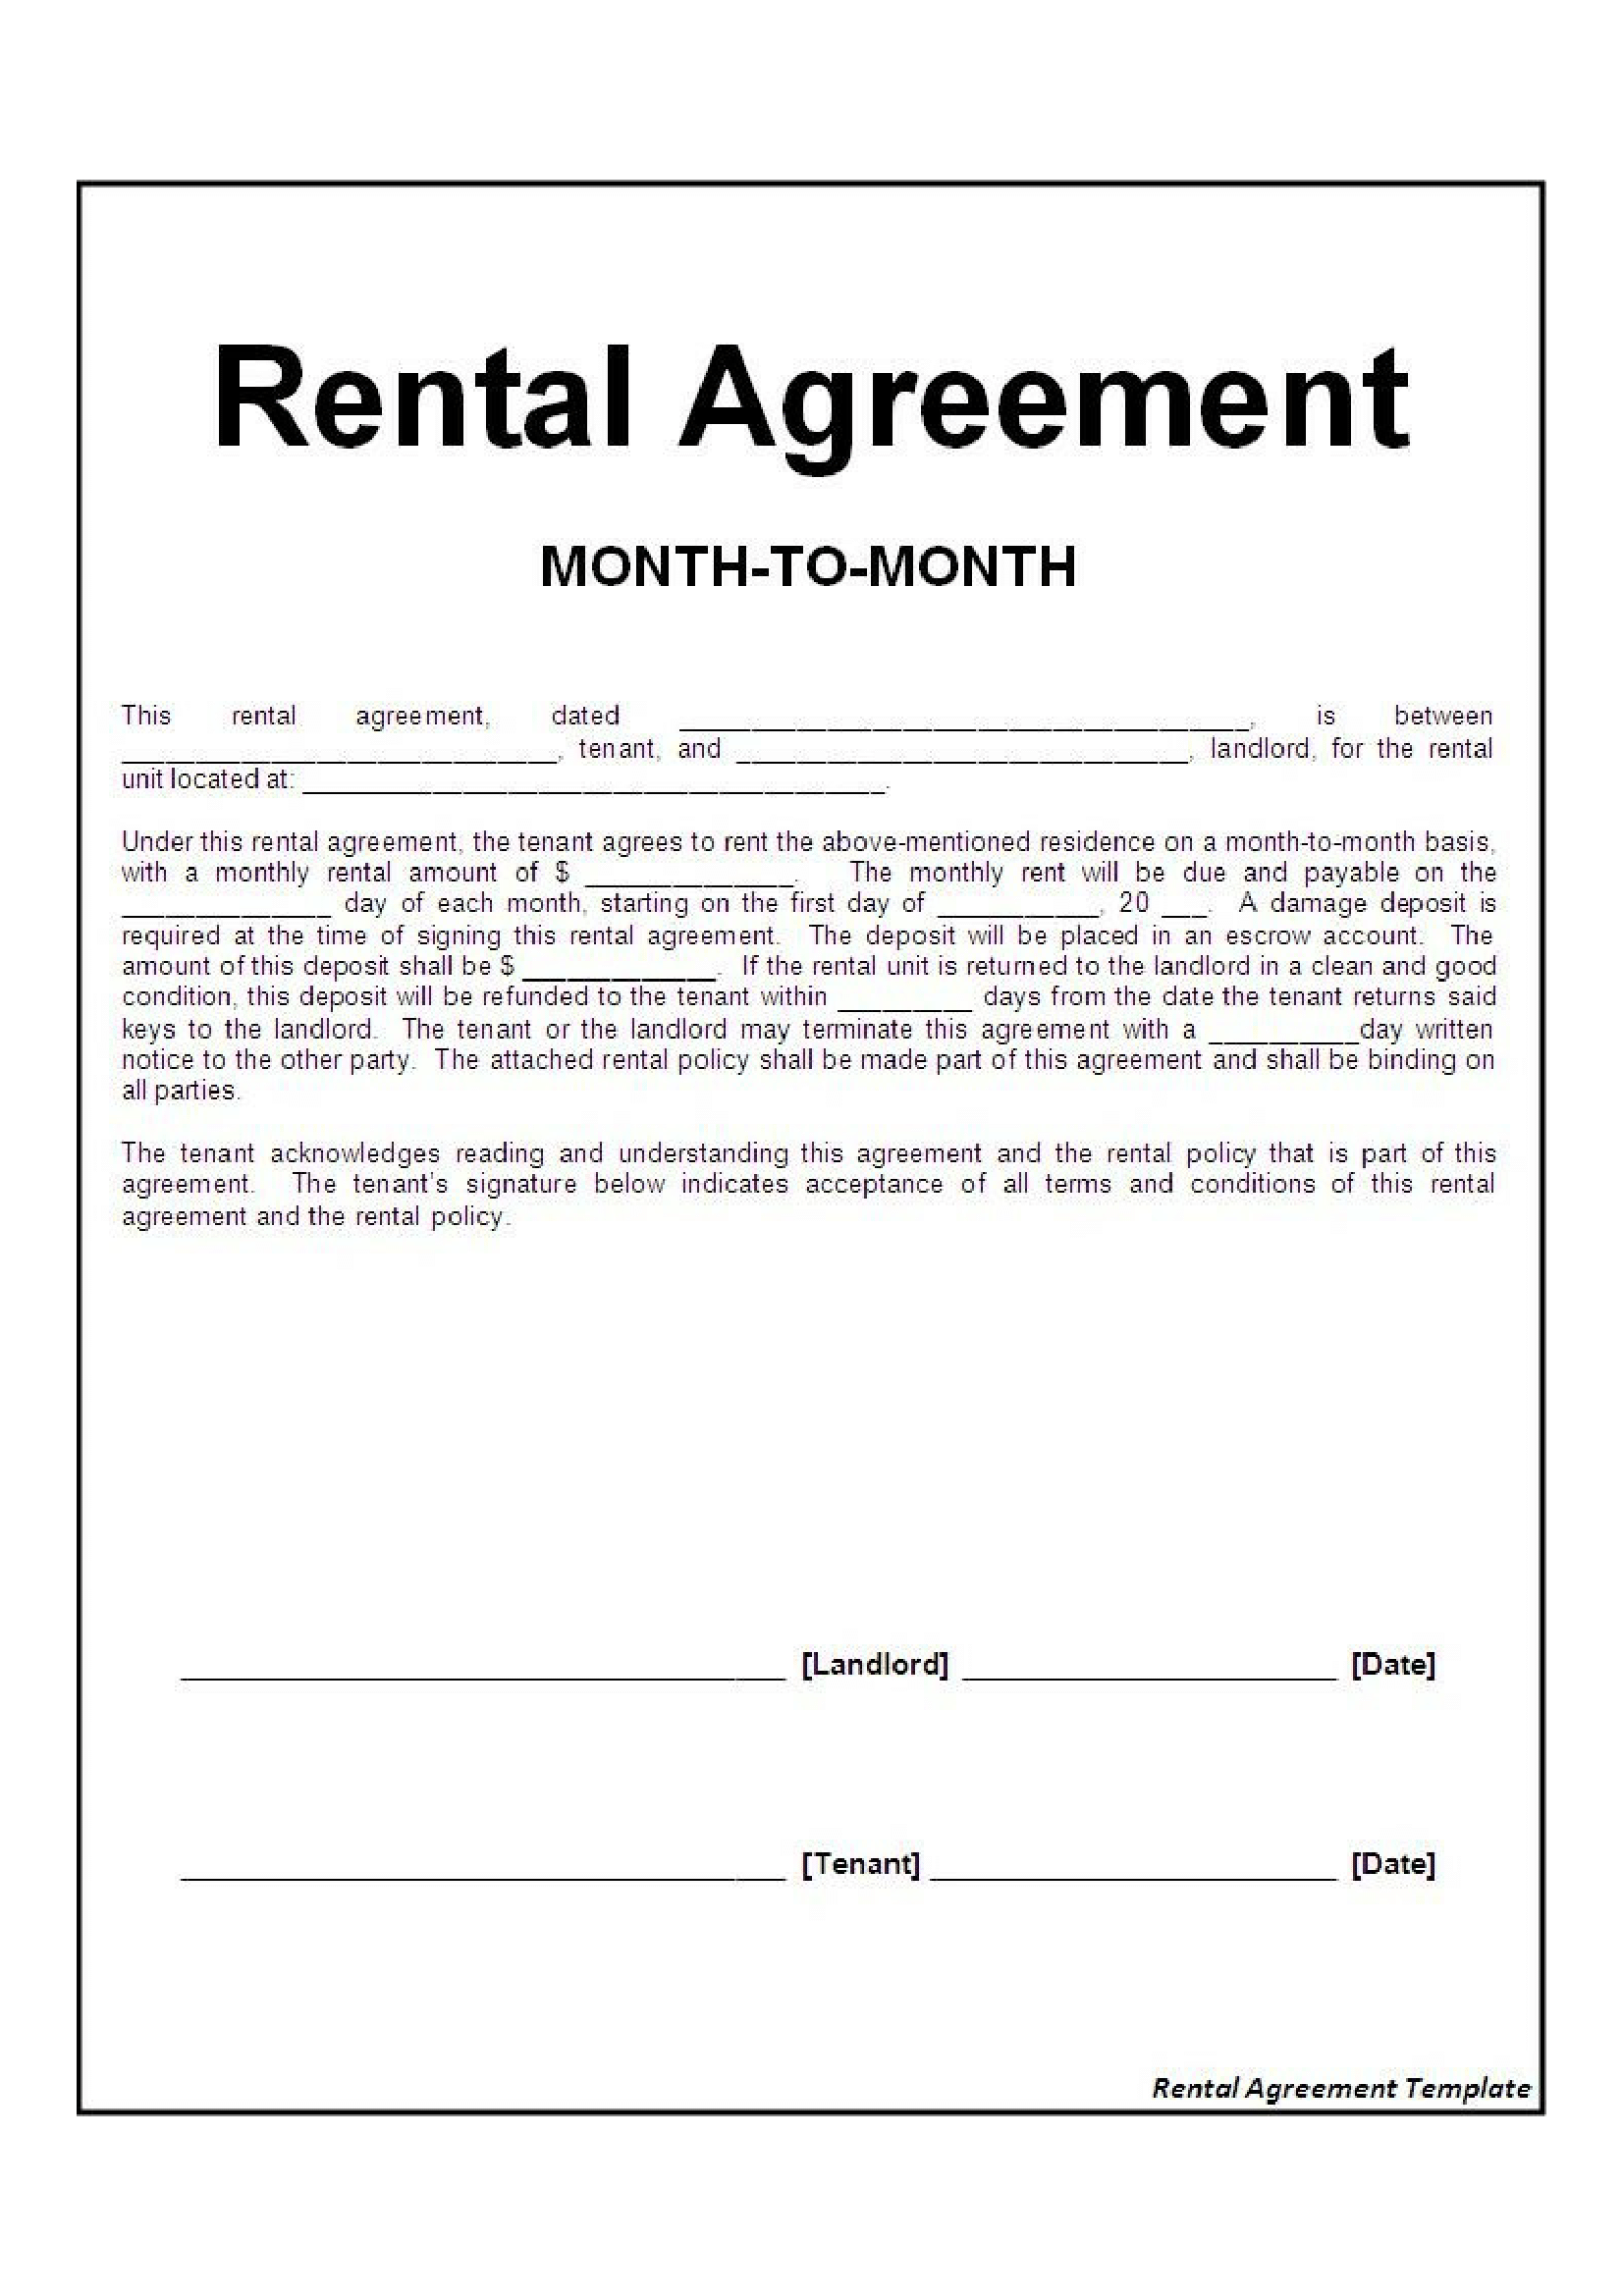 rental agreement month to month form Foot.freedomtraining.co